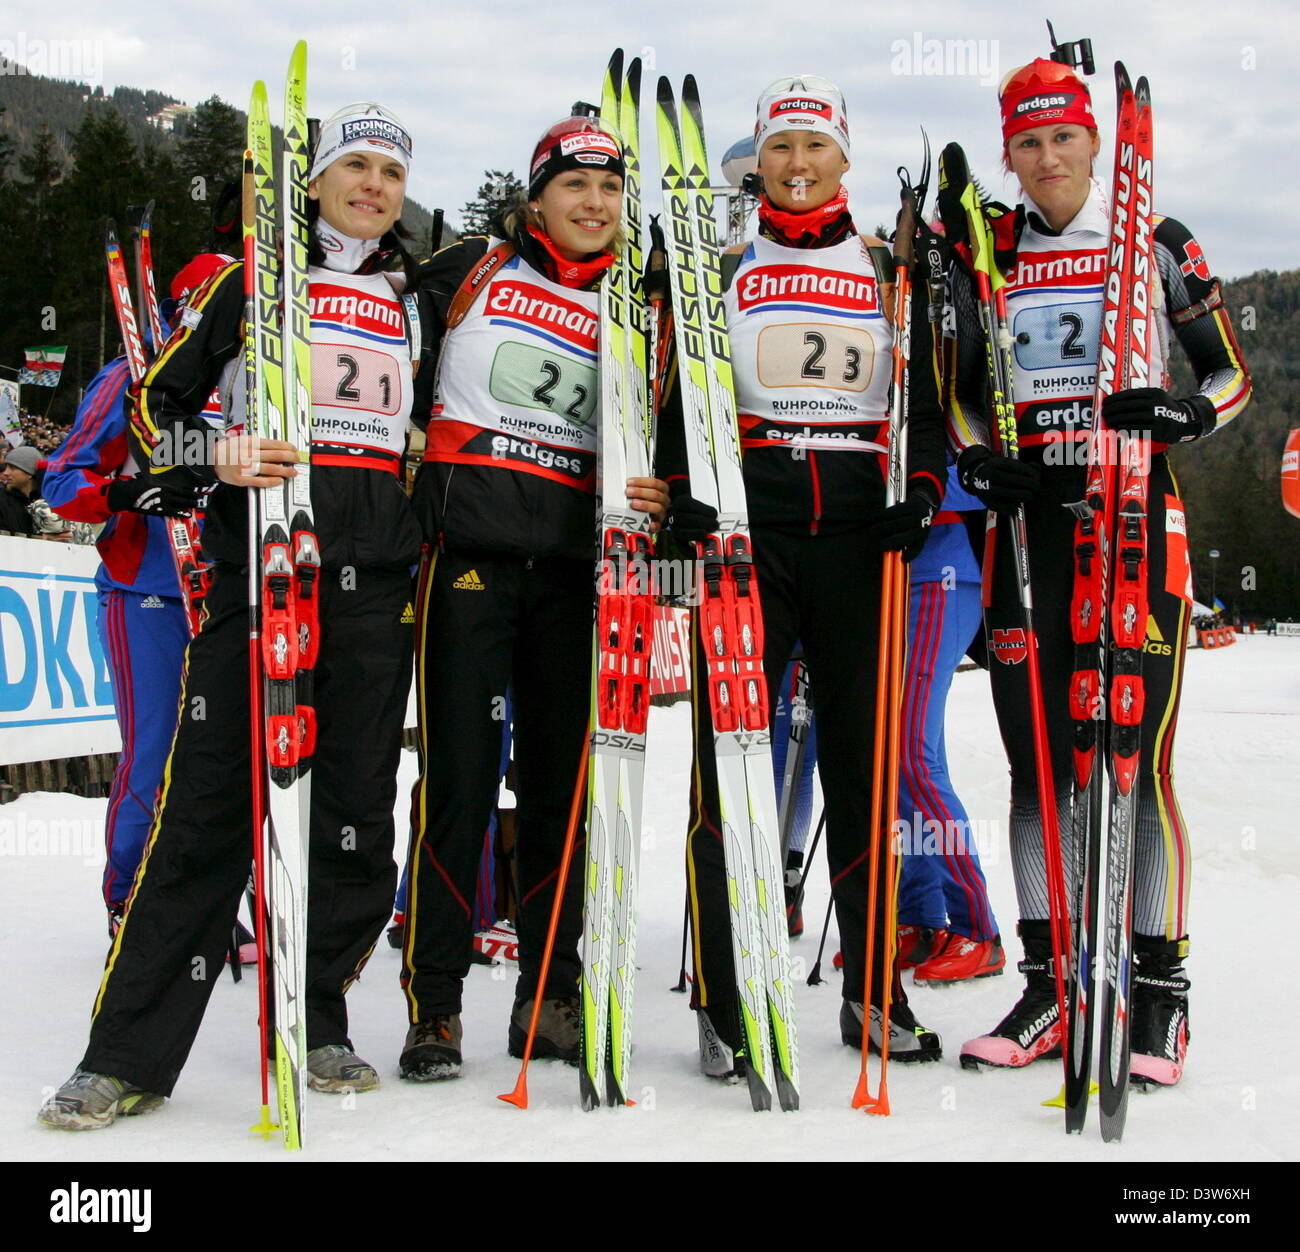 German Kati Wilhelm, Simone Denkinger, Magdalena Neuner  and Kathrin Hitzer (R-L) smile after the Biathlon World Cup women's 6k relay event in Ruhpolding, Germany, Wednesday, 10 January 2007. Russia produced the finest shooting performance of the season to win the fourth World Cup women's relay of the campaign in Ruhpolding ahead of the German team. Photo: Matthias Schrader Stock Photo